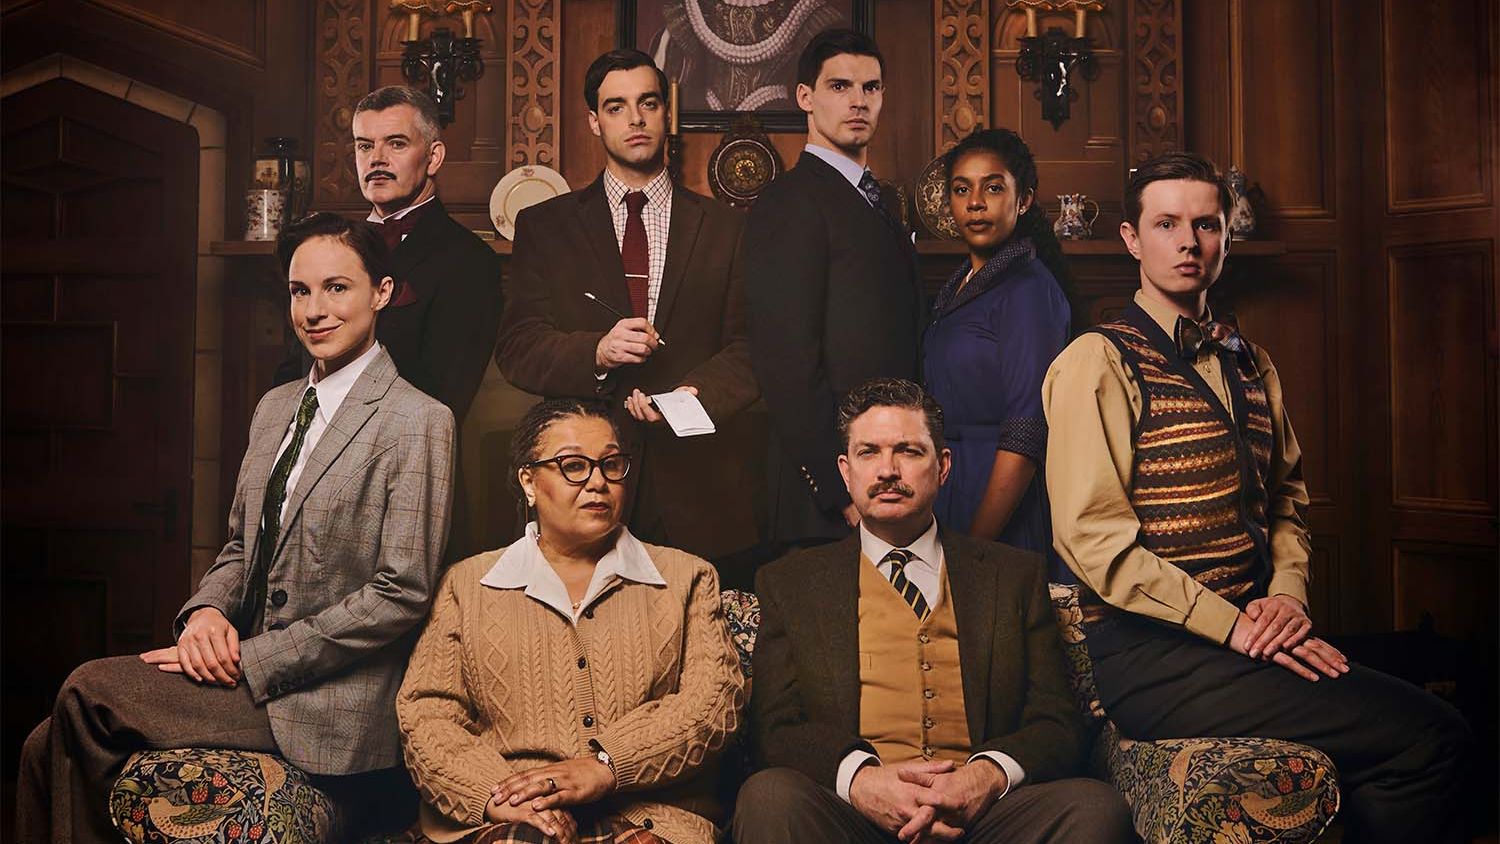 Agatha Christie's The Mousetrap celebrates 70 years with new tour